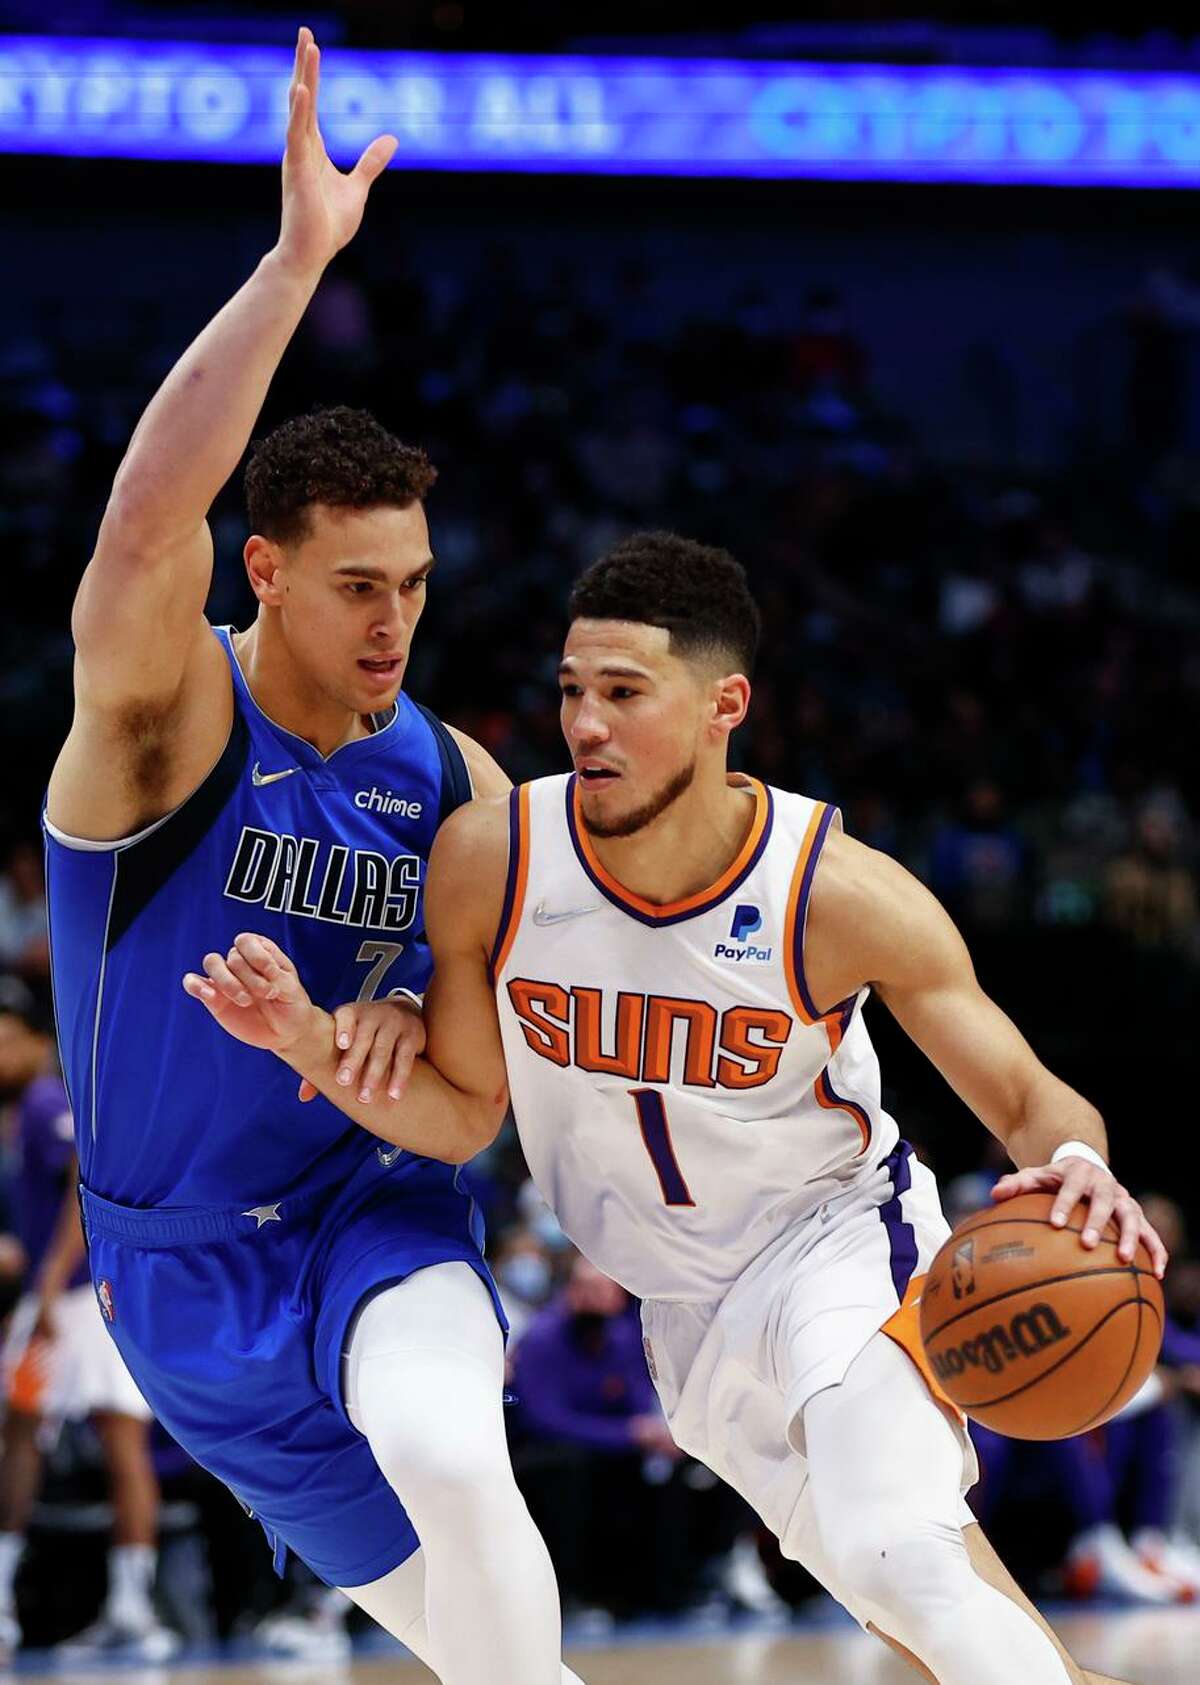 Suns guard Devin Booker had 28 points and six assists in Phoenix’s 109-101 victory over the Mavericks.